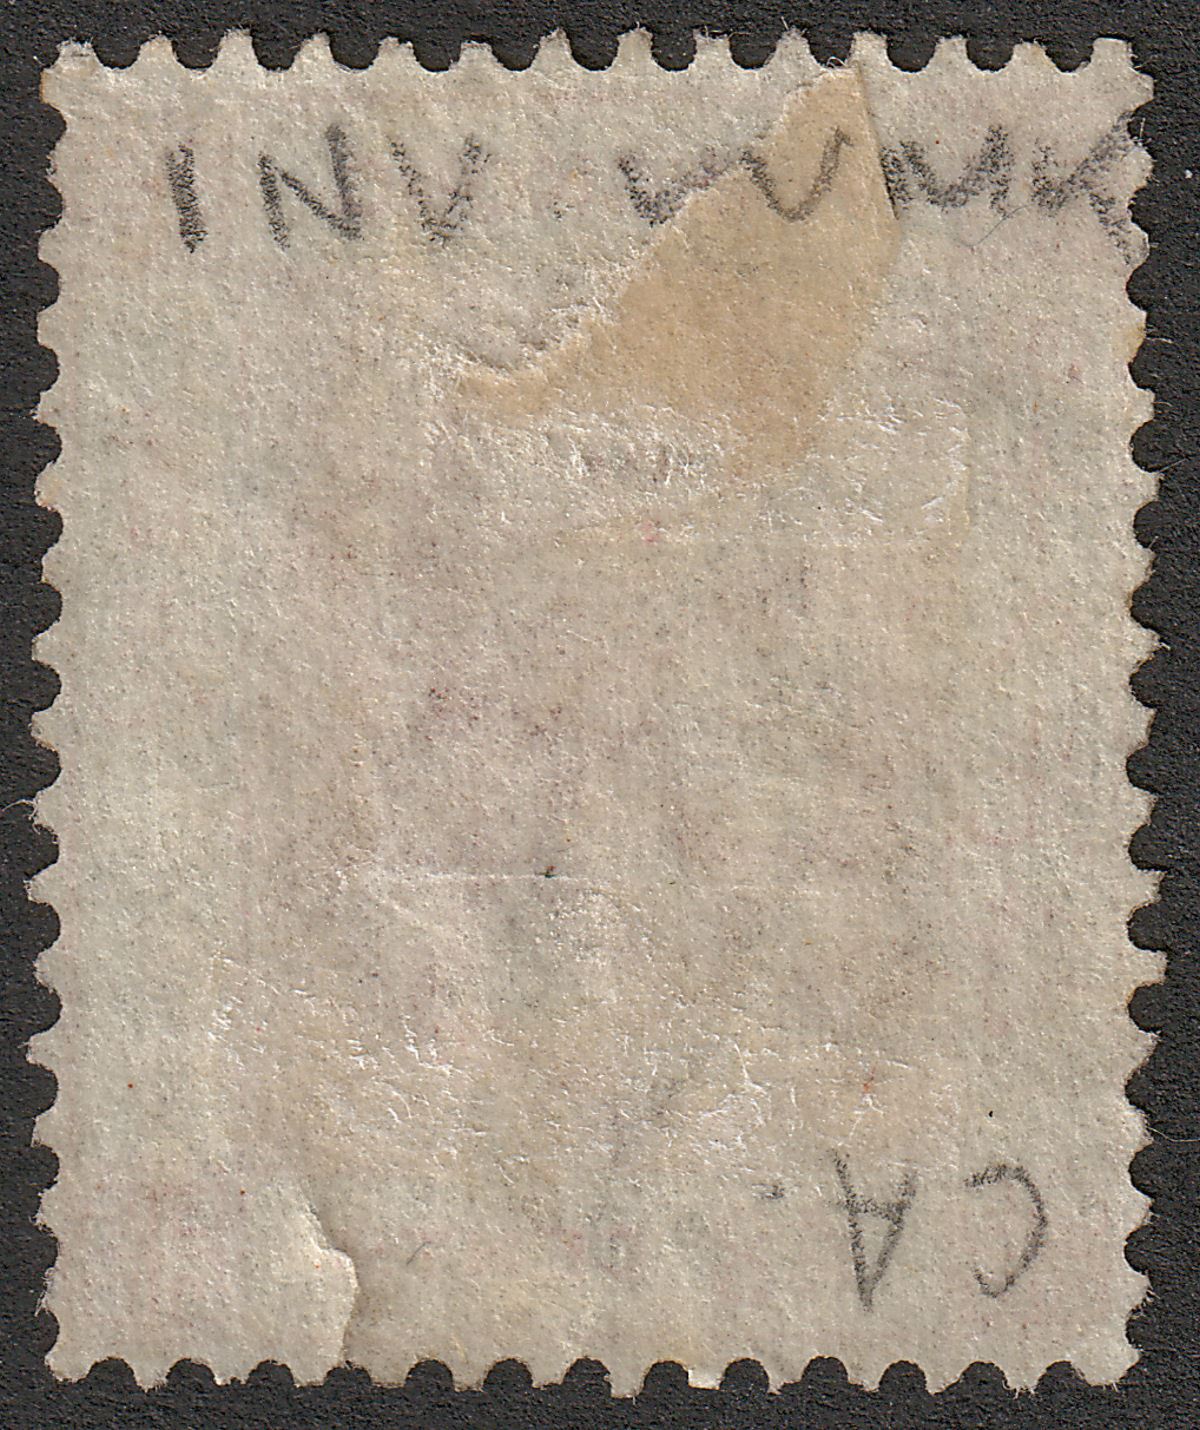 Hong Kong 1865 QV 48c Rose-Carmine watermark Inverted Used SG17w cat £200 tear